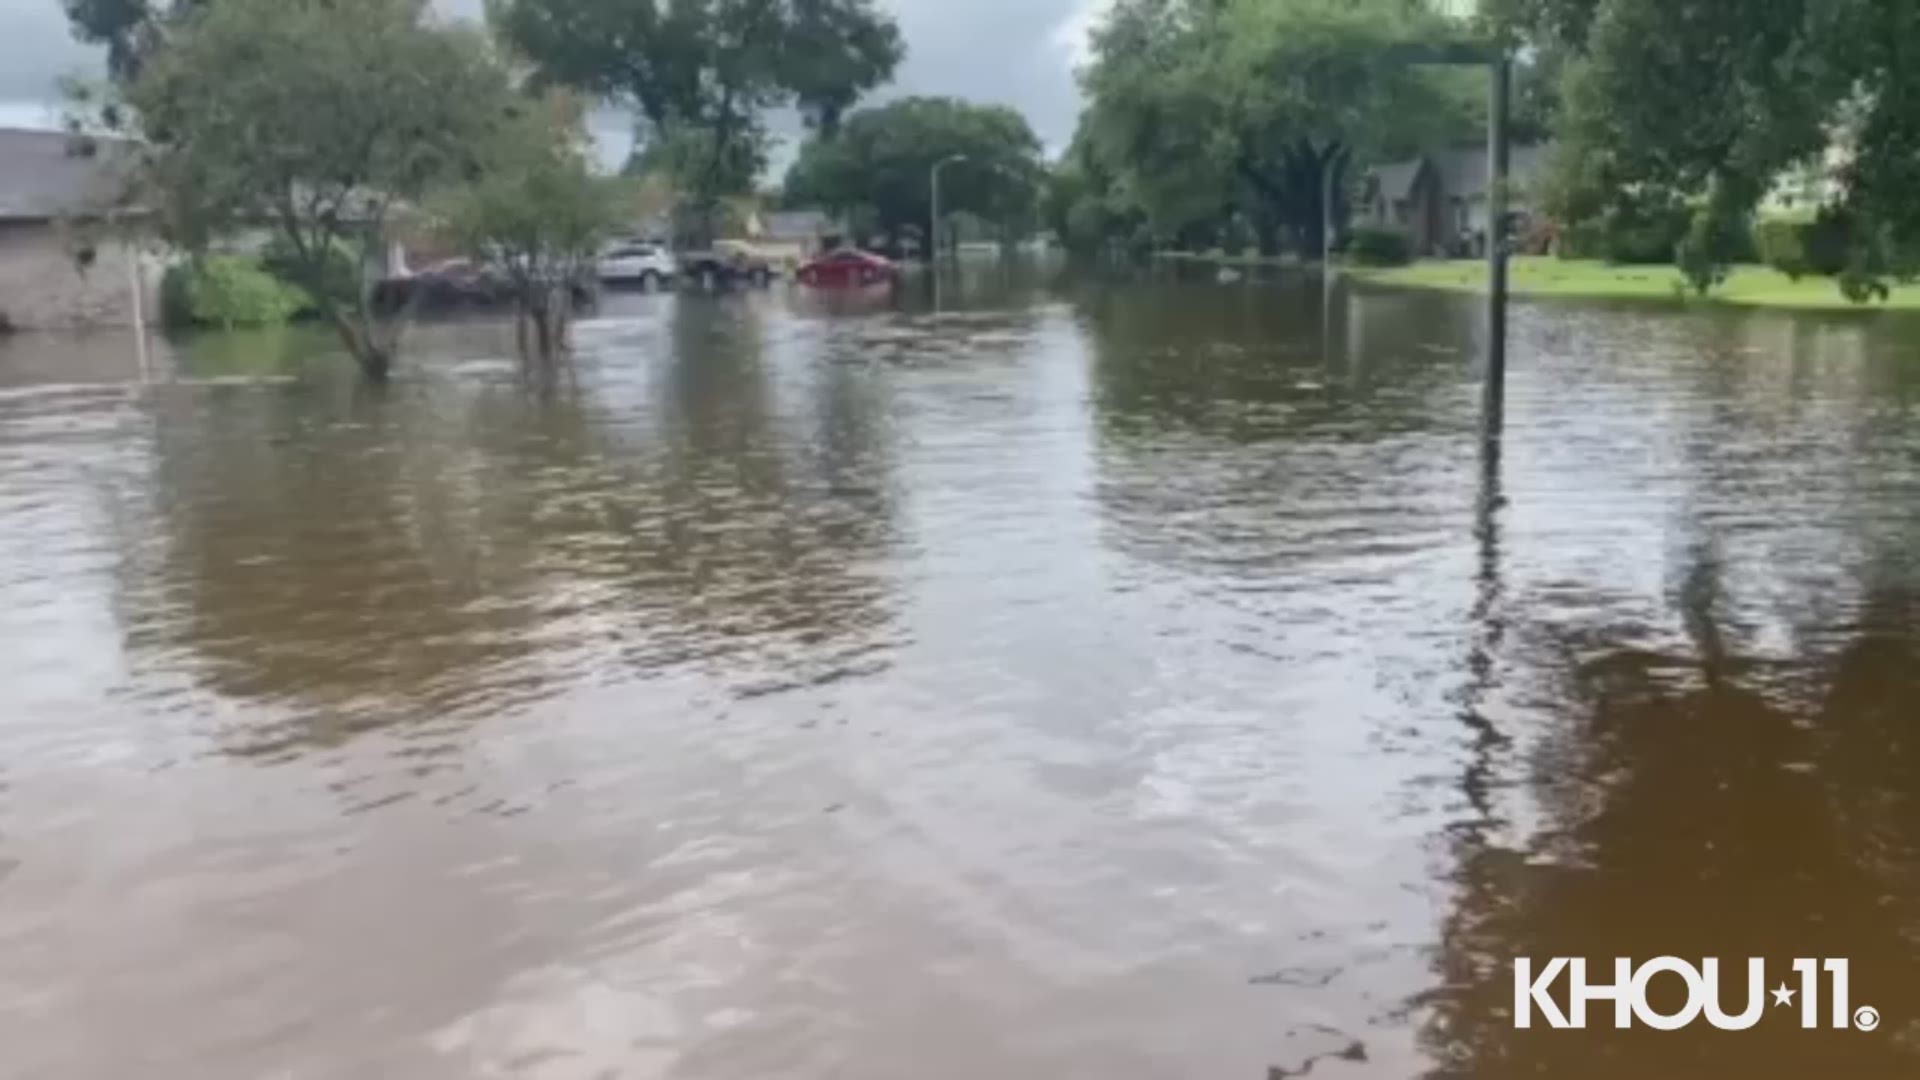 Heavy rains from Tropical Storm Beta left a neighborhood in southeast Houston flooded.